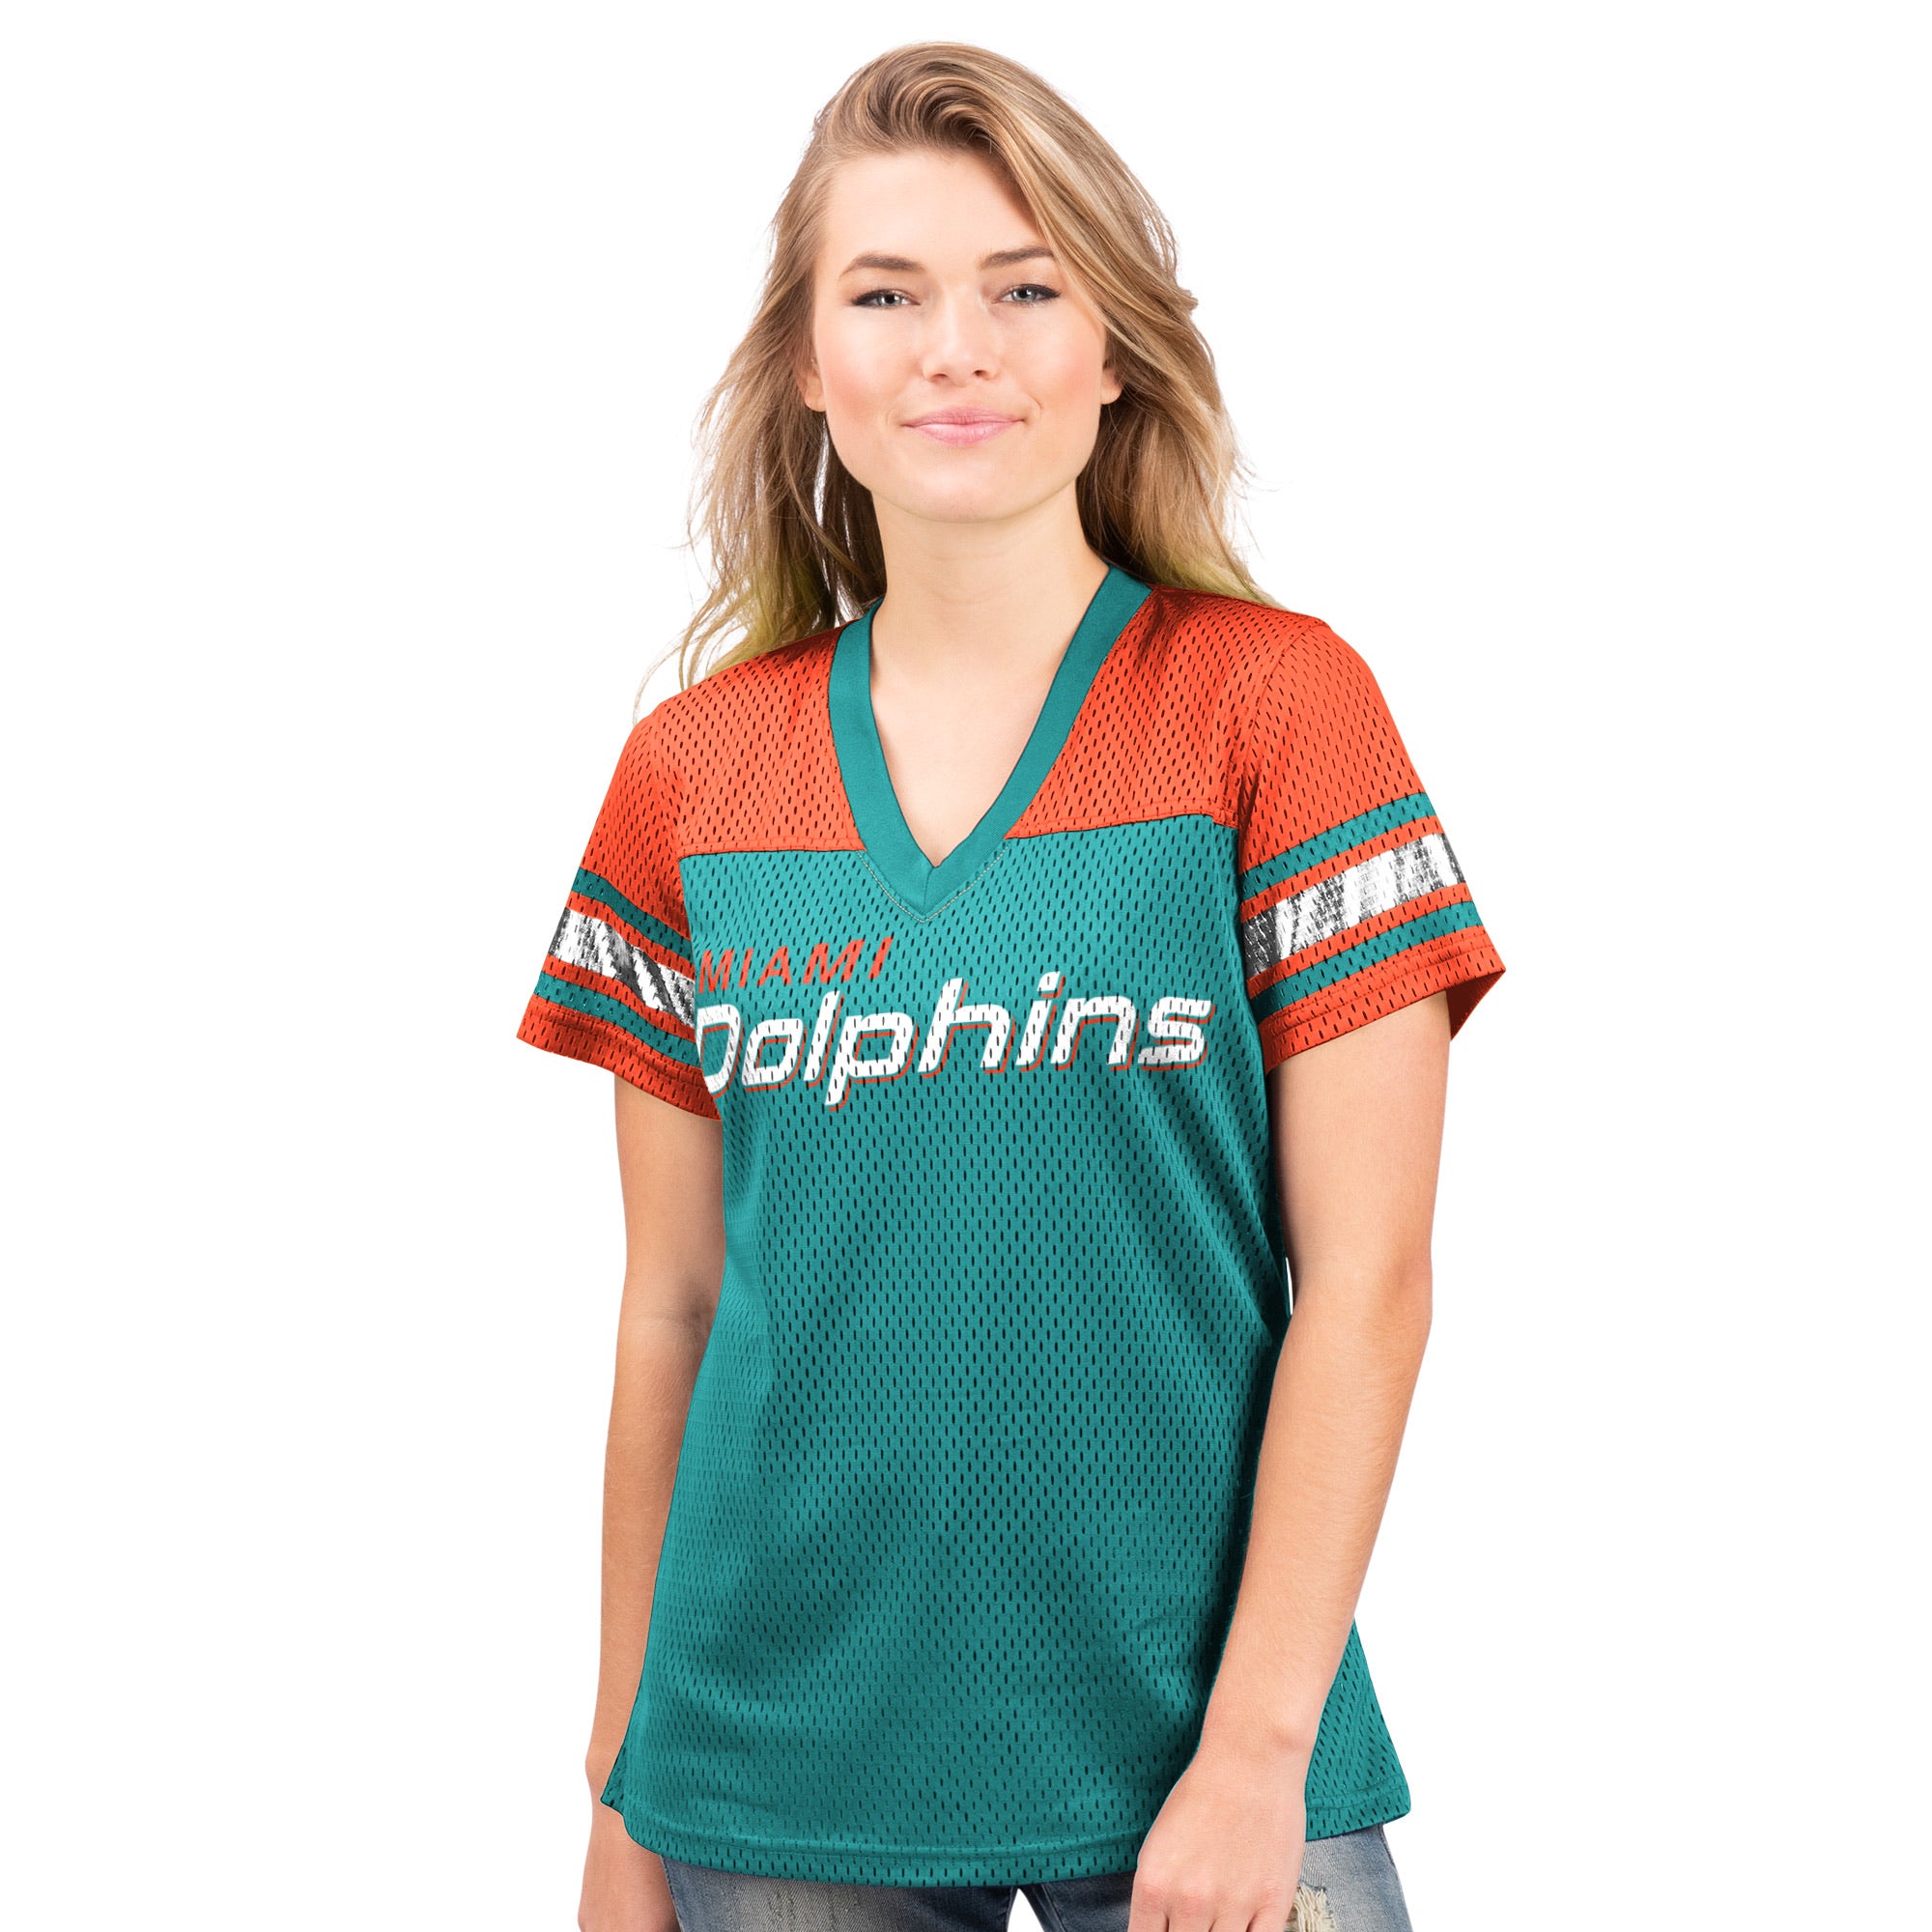 miami dolphins jersey shirt